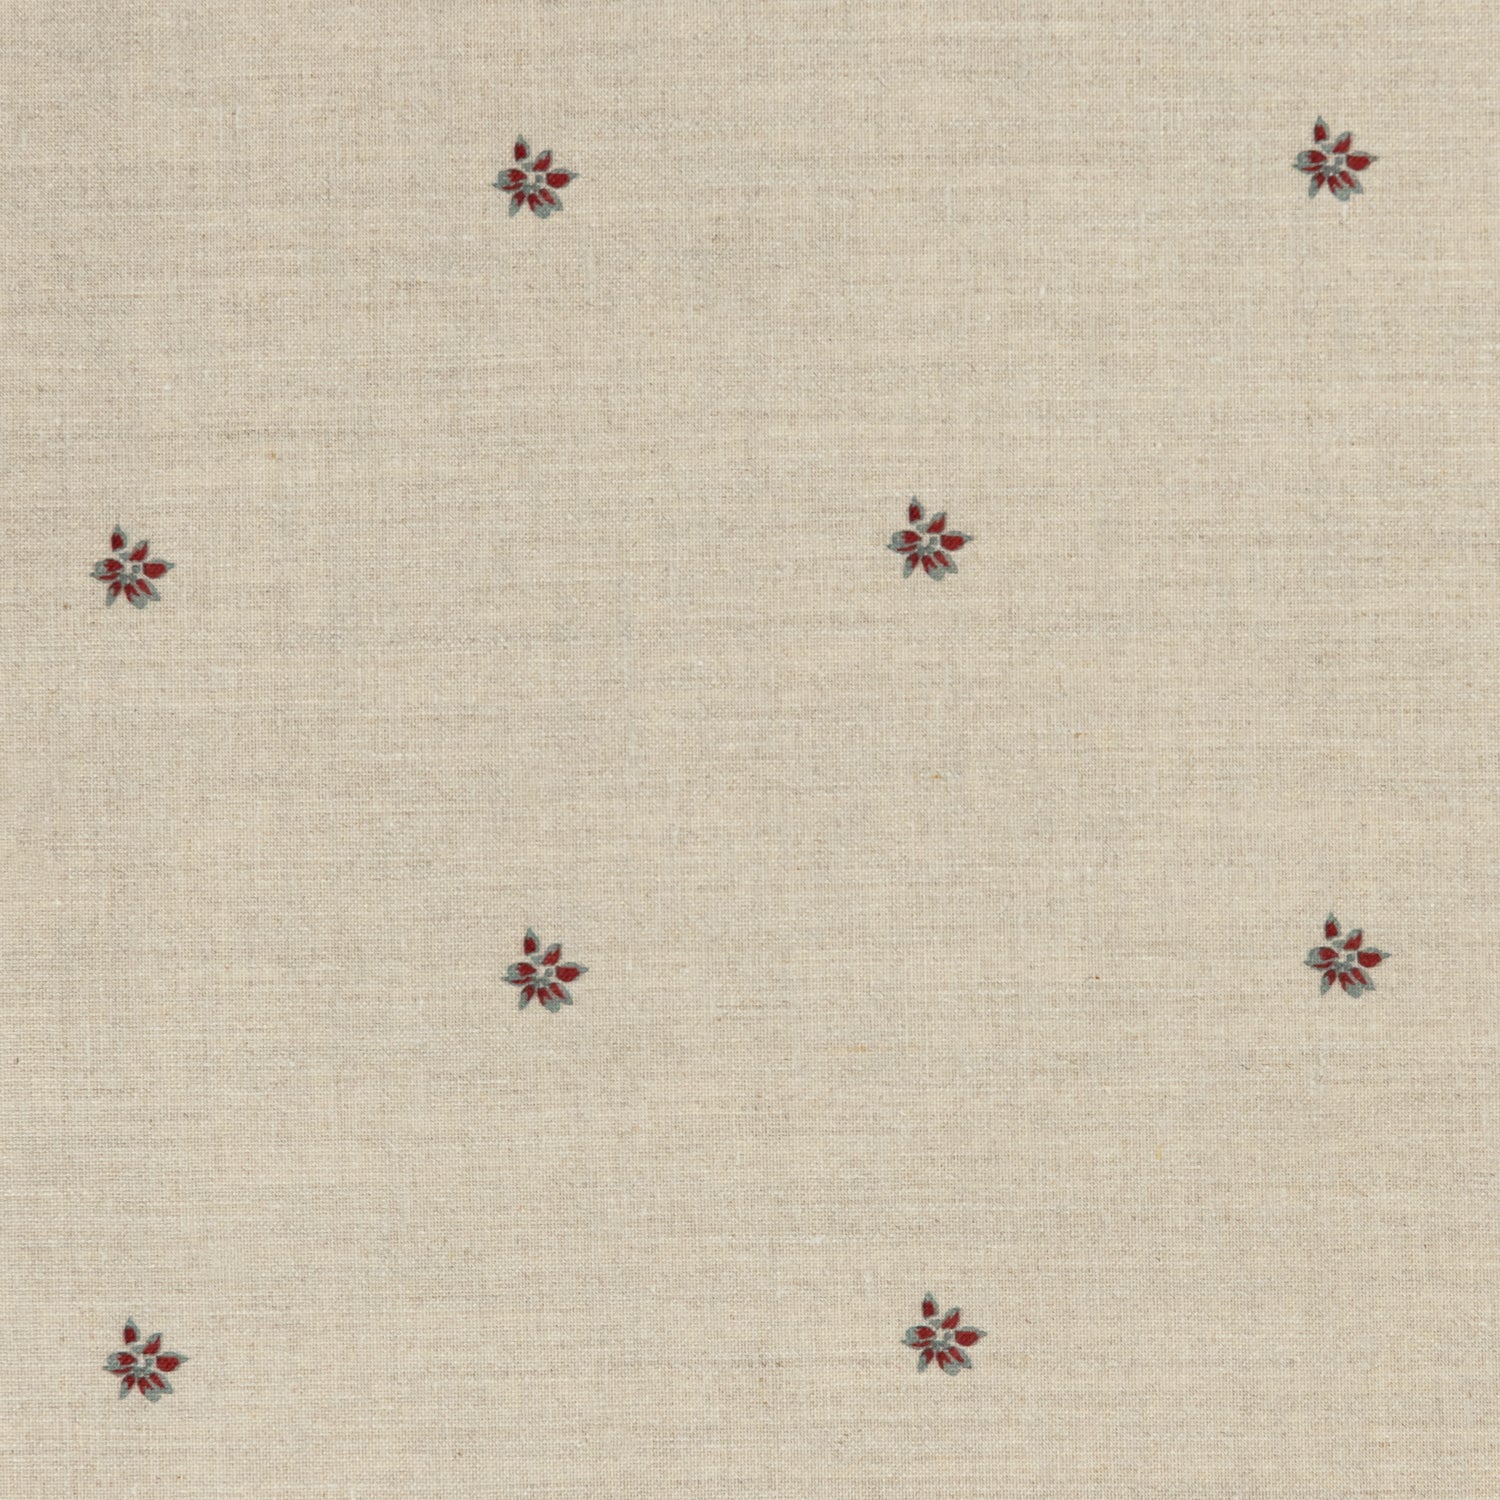 Detail of a printed linen fabric in a repeating small-scale flower pattern in red and gray on a cream field.